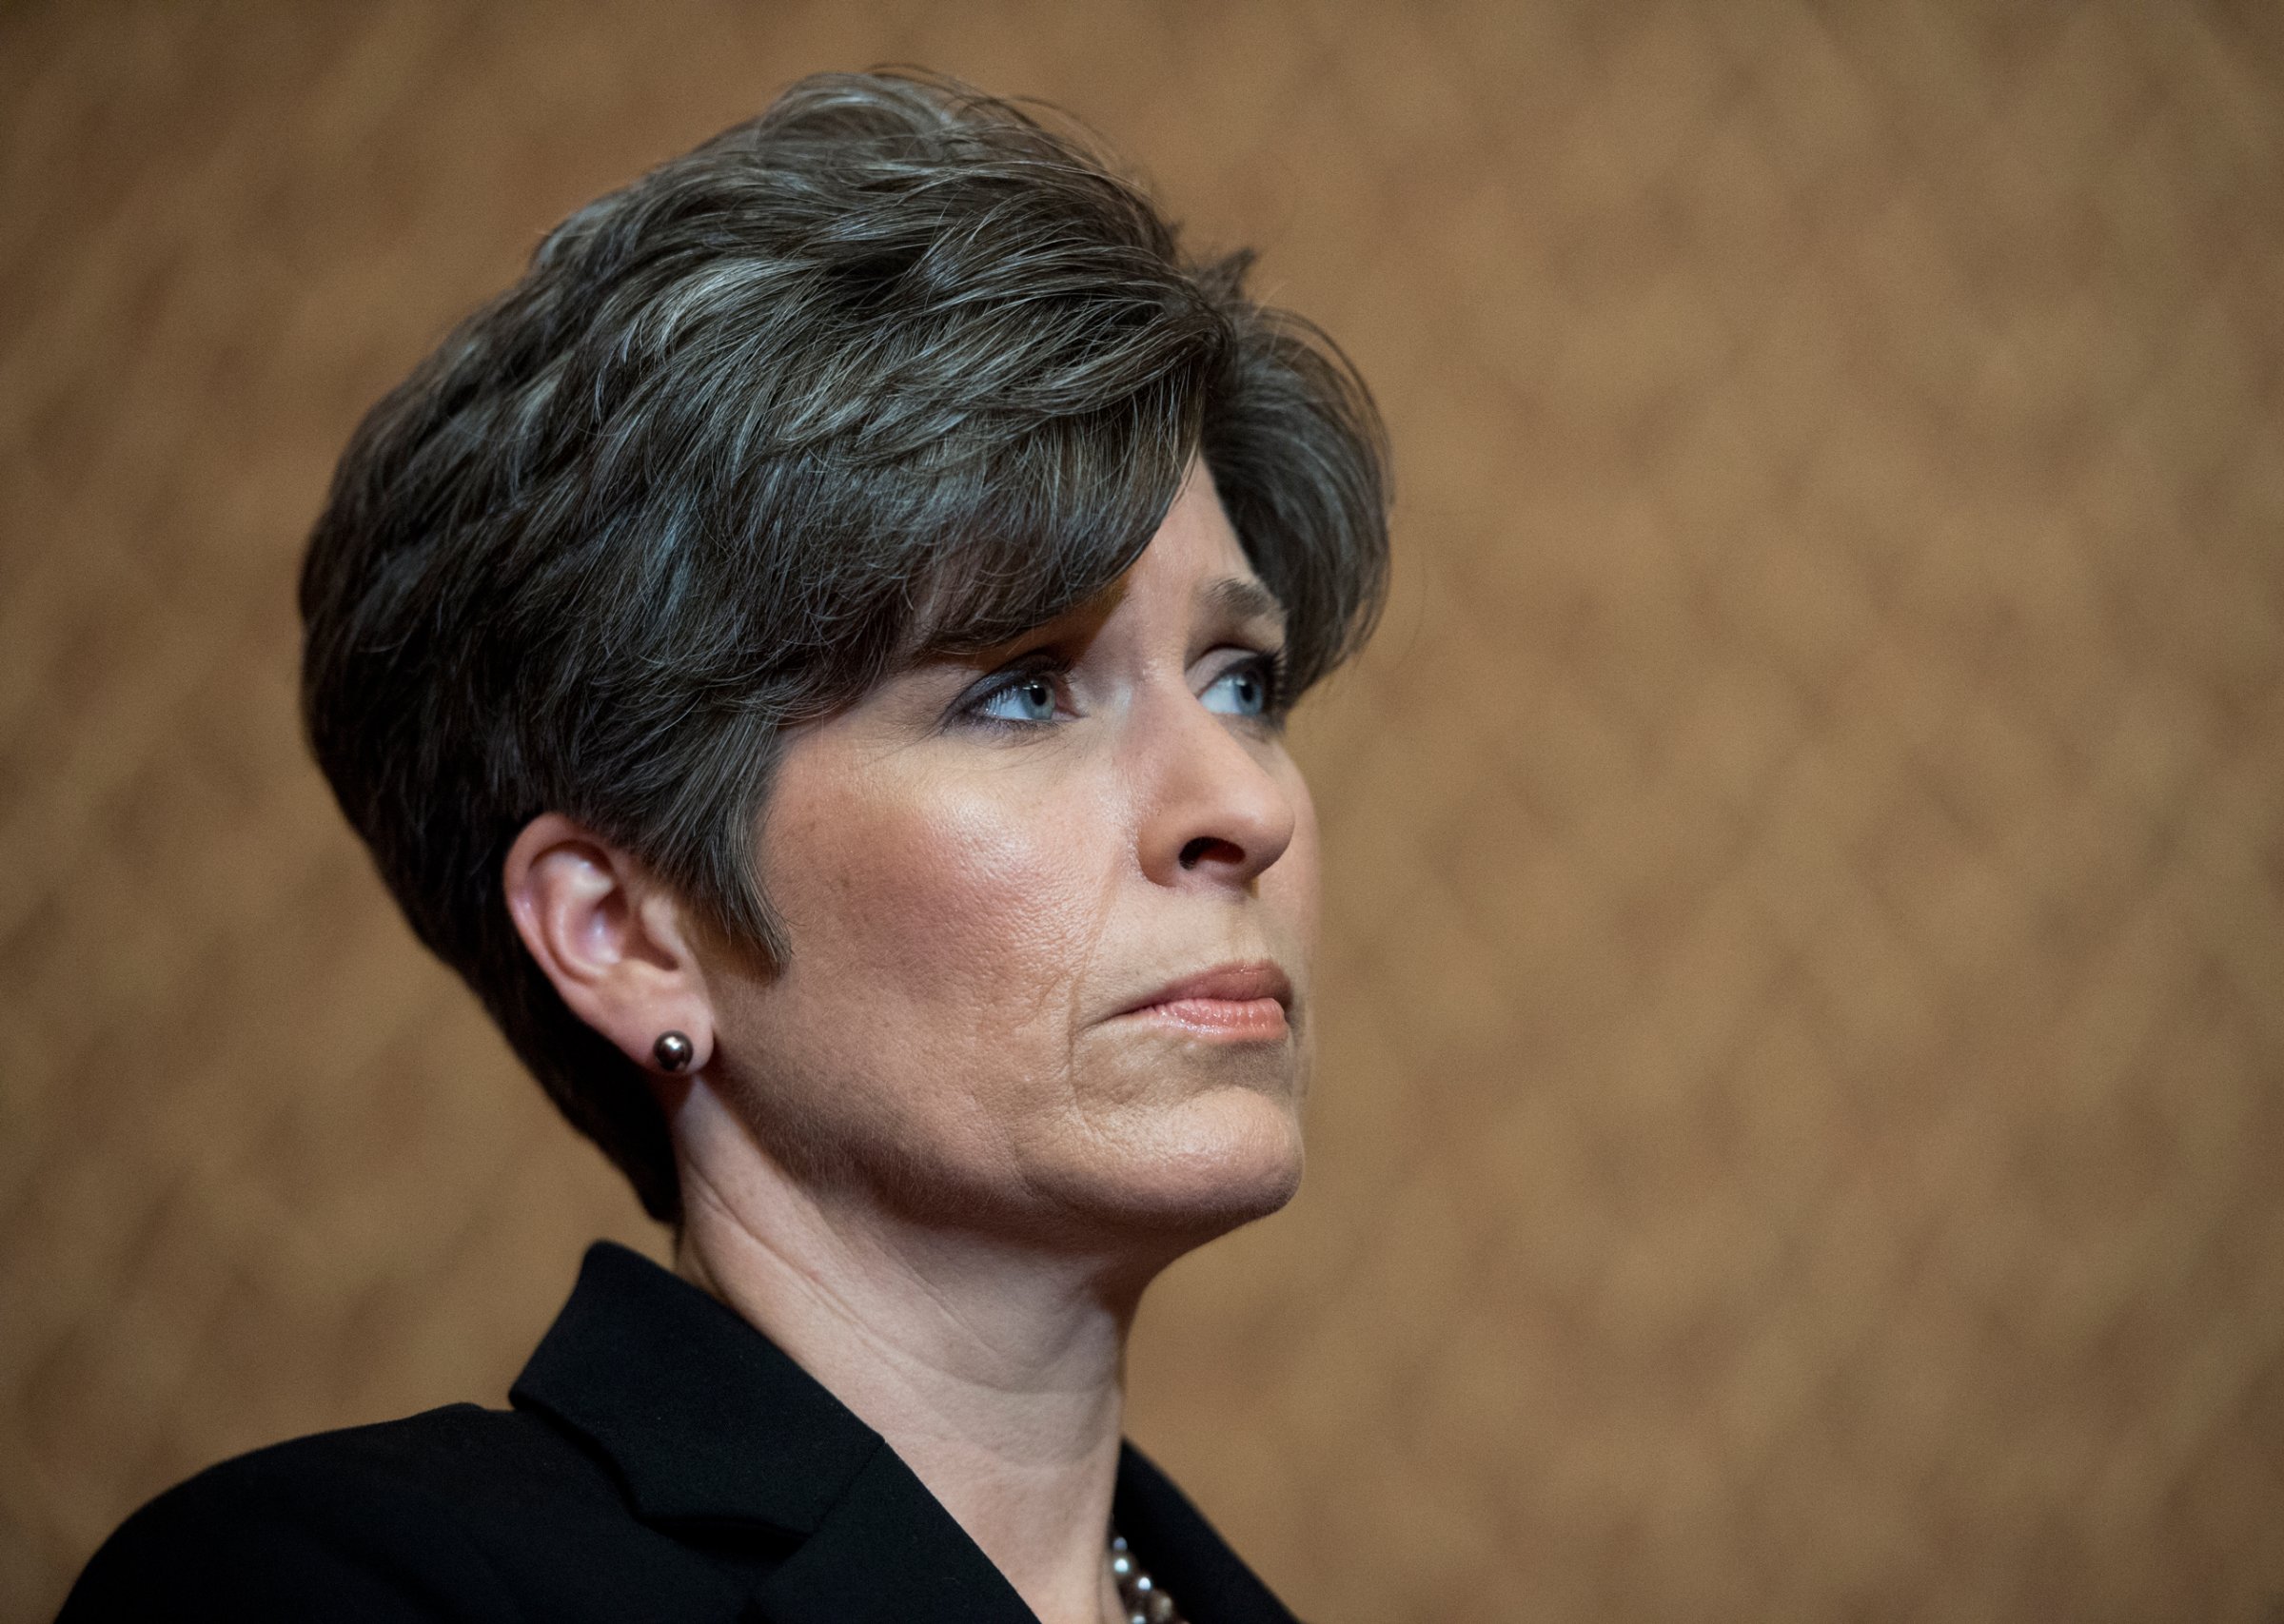 UNITED STATES - APRIL 26: Sen. Joni Ernst (R-IA) participates in the news conference with survivors of sexual assault to urge the Senate to pass the Campus Accountability and Safety Act on Tuesday, April 26, 2016. (Photo By Bill Clark/CQ Roll Call) (CQ Roll Call via AP Images)